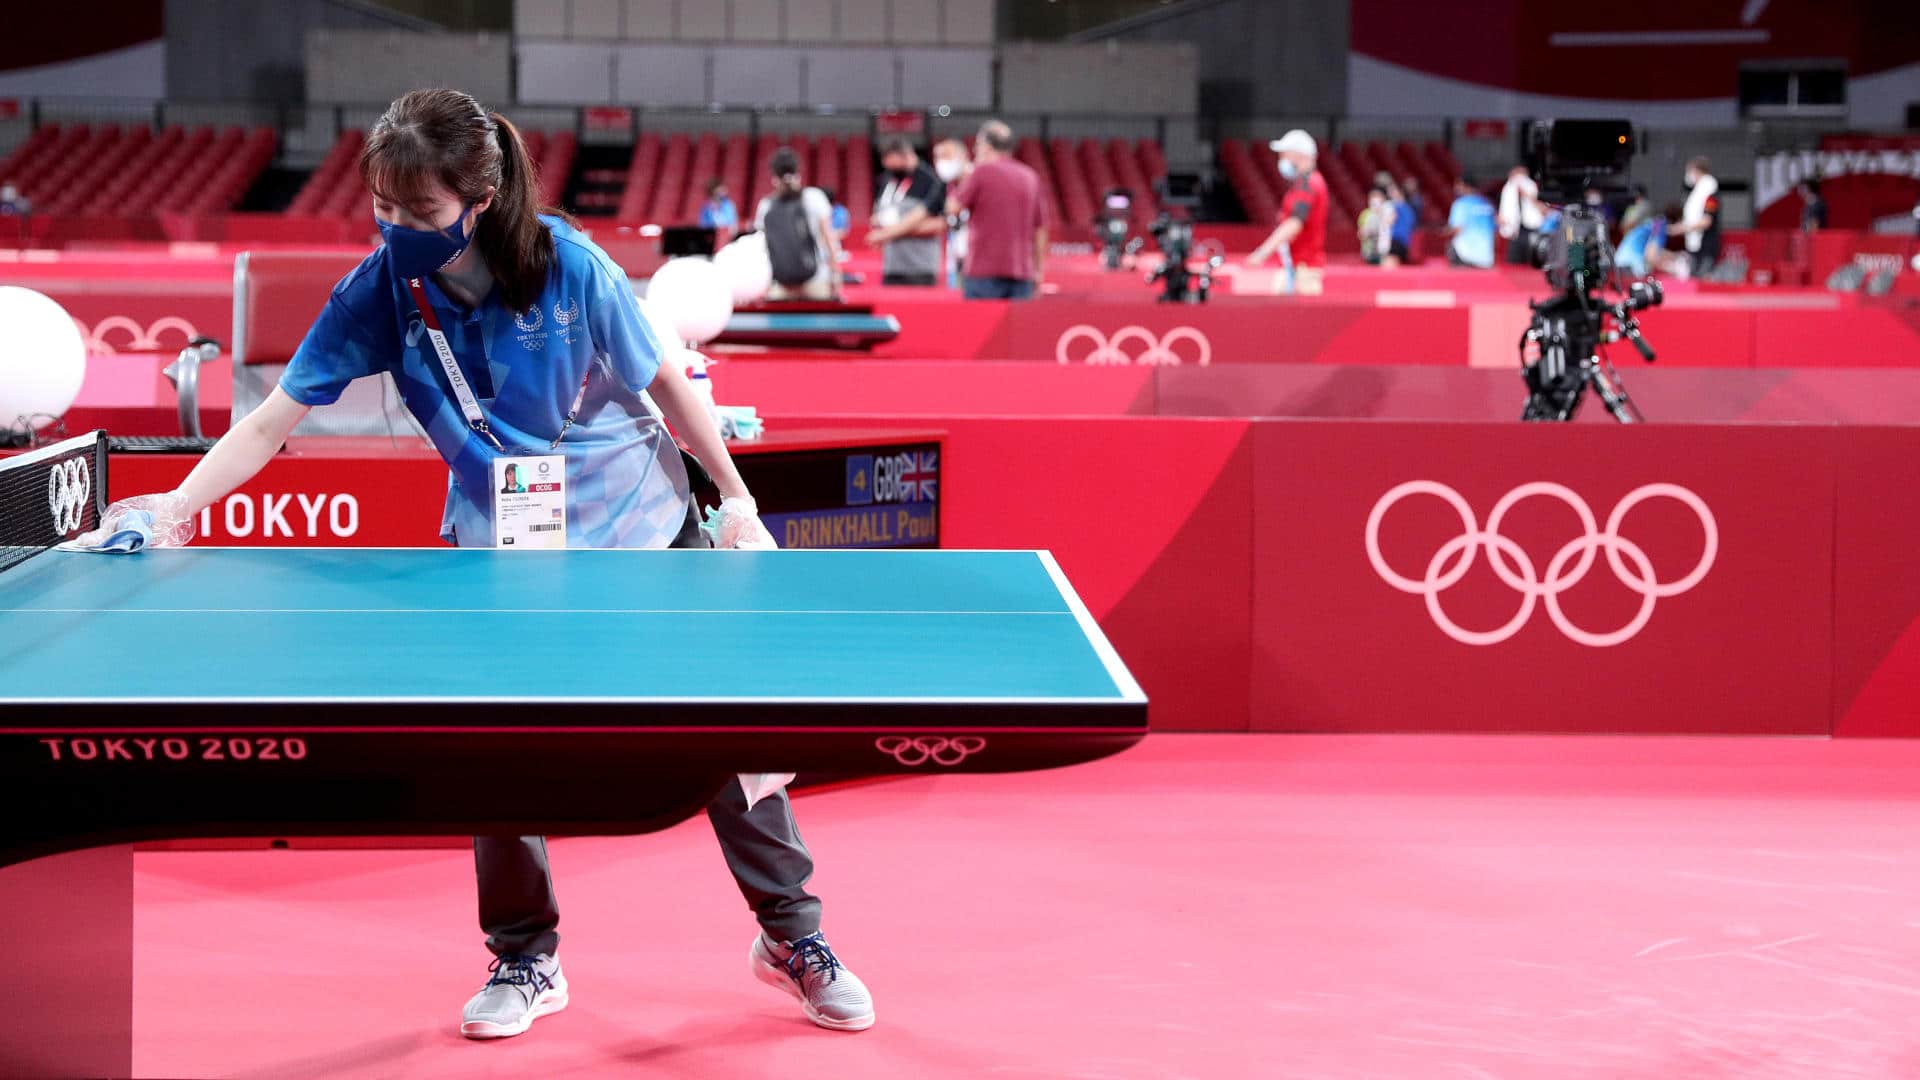 A worker disinfects a table tennis court ahead of the Tokyo 2020 Olympic Games on July 21, 2021.